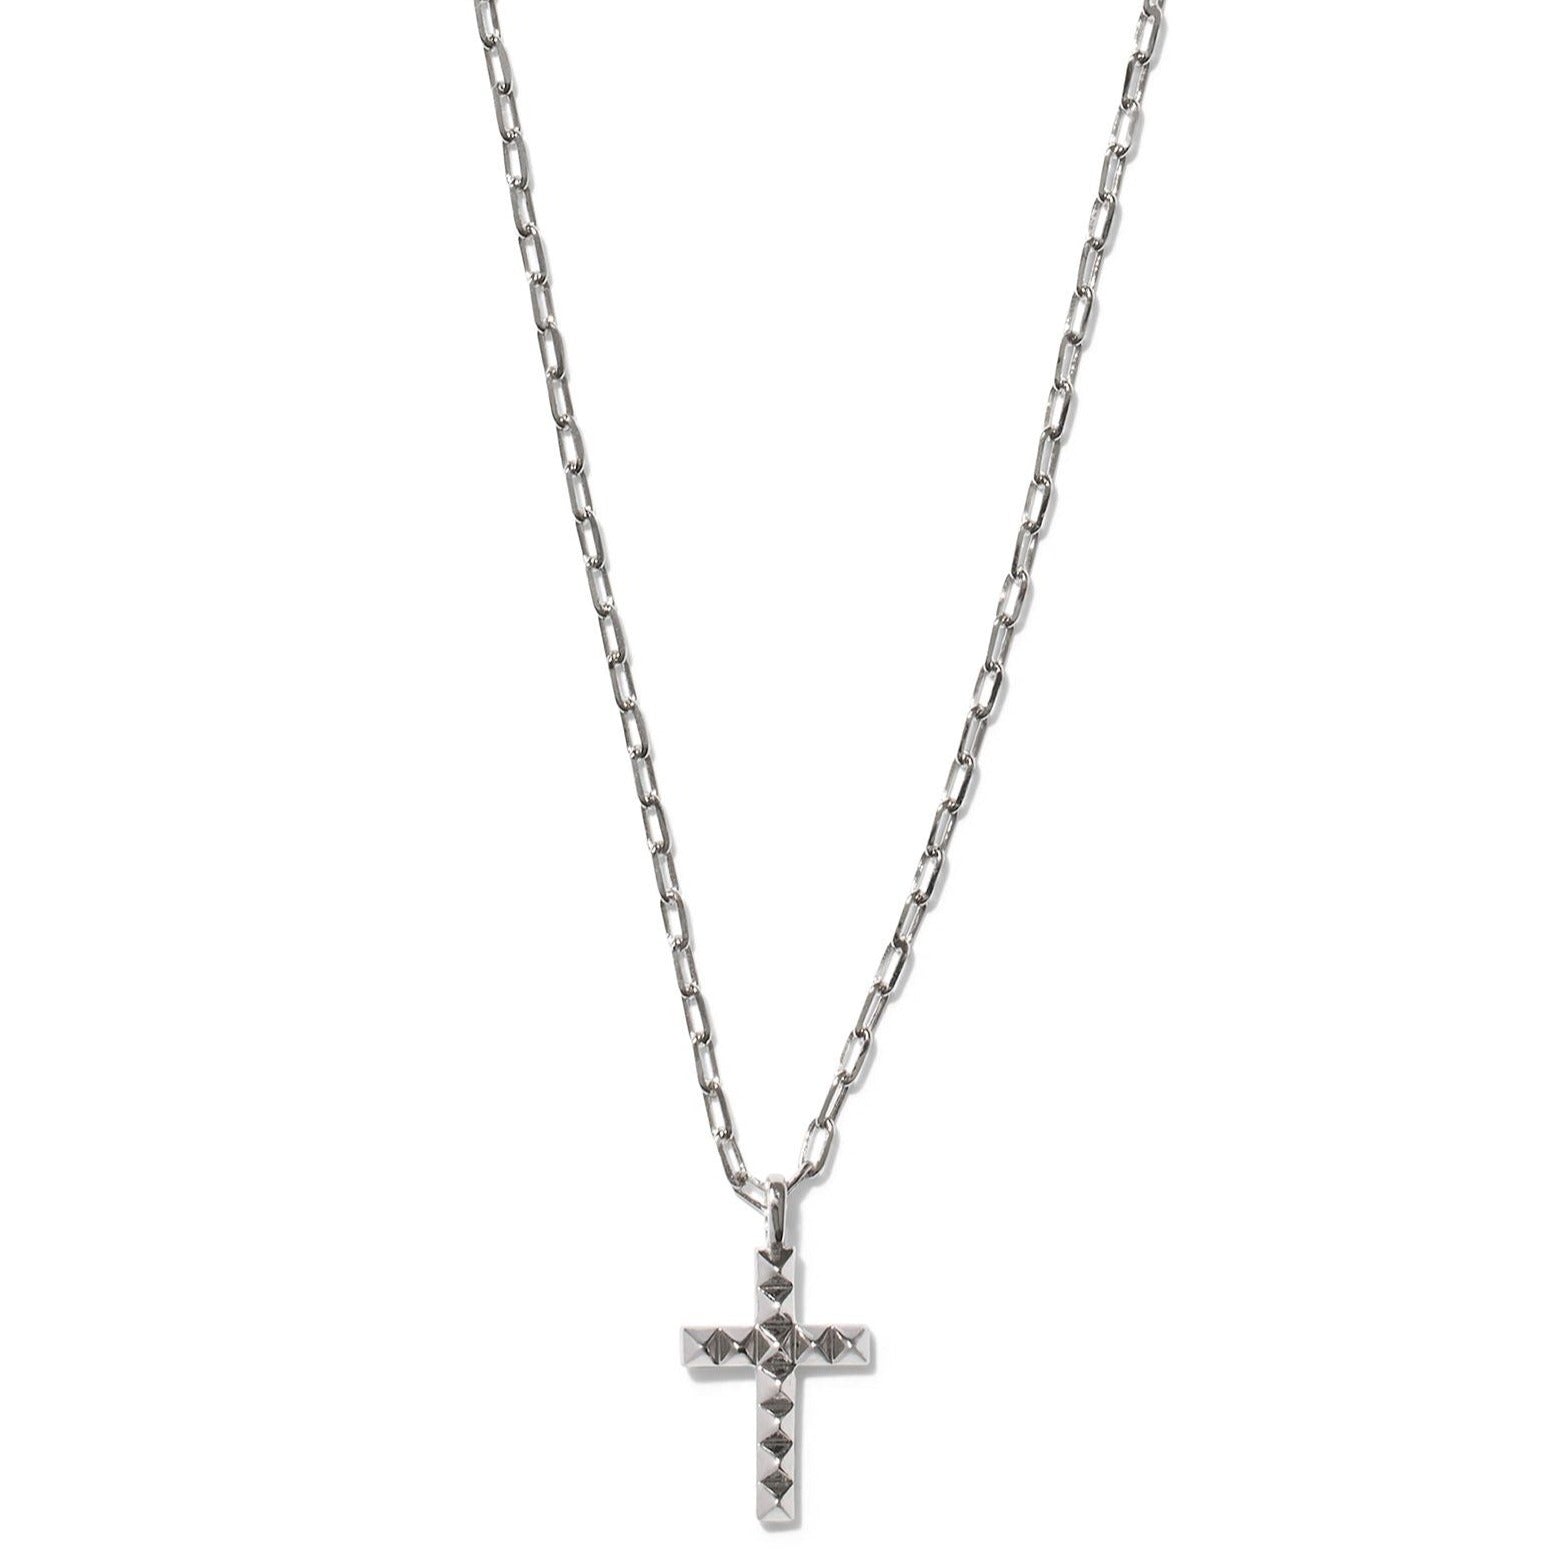 Kendra Scott | Jada Cross Short Pendant Necklace in Silver - Giddy Up Glamour Boutique